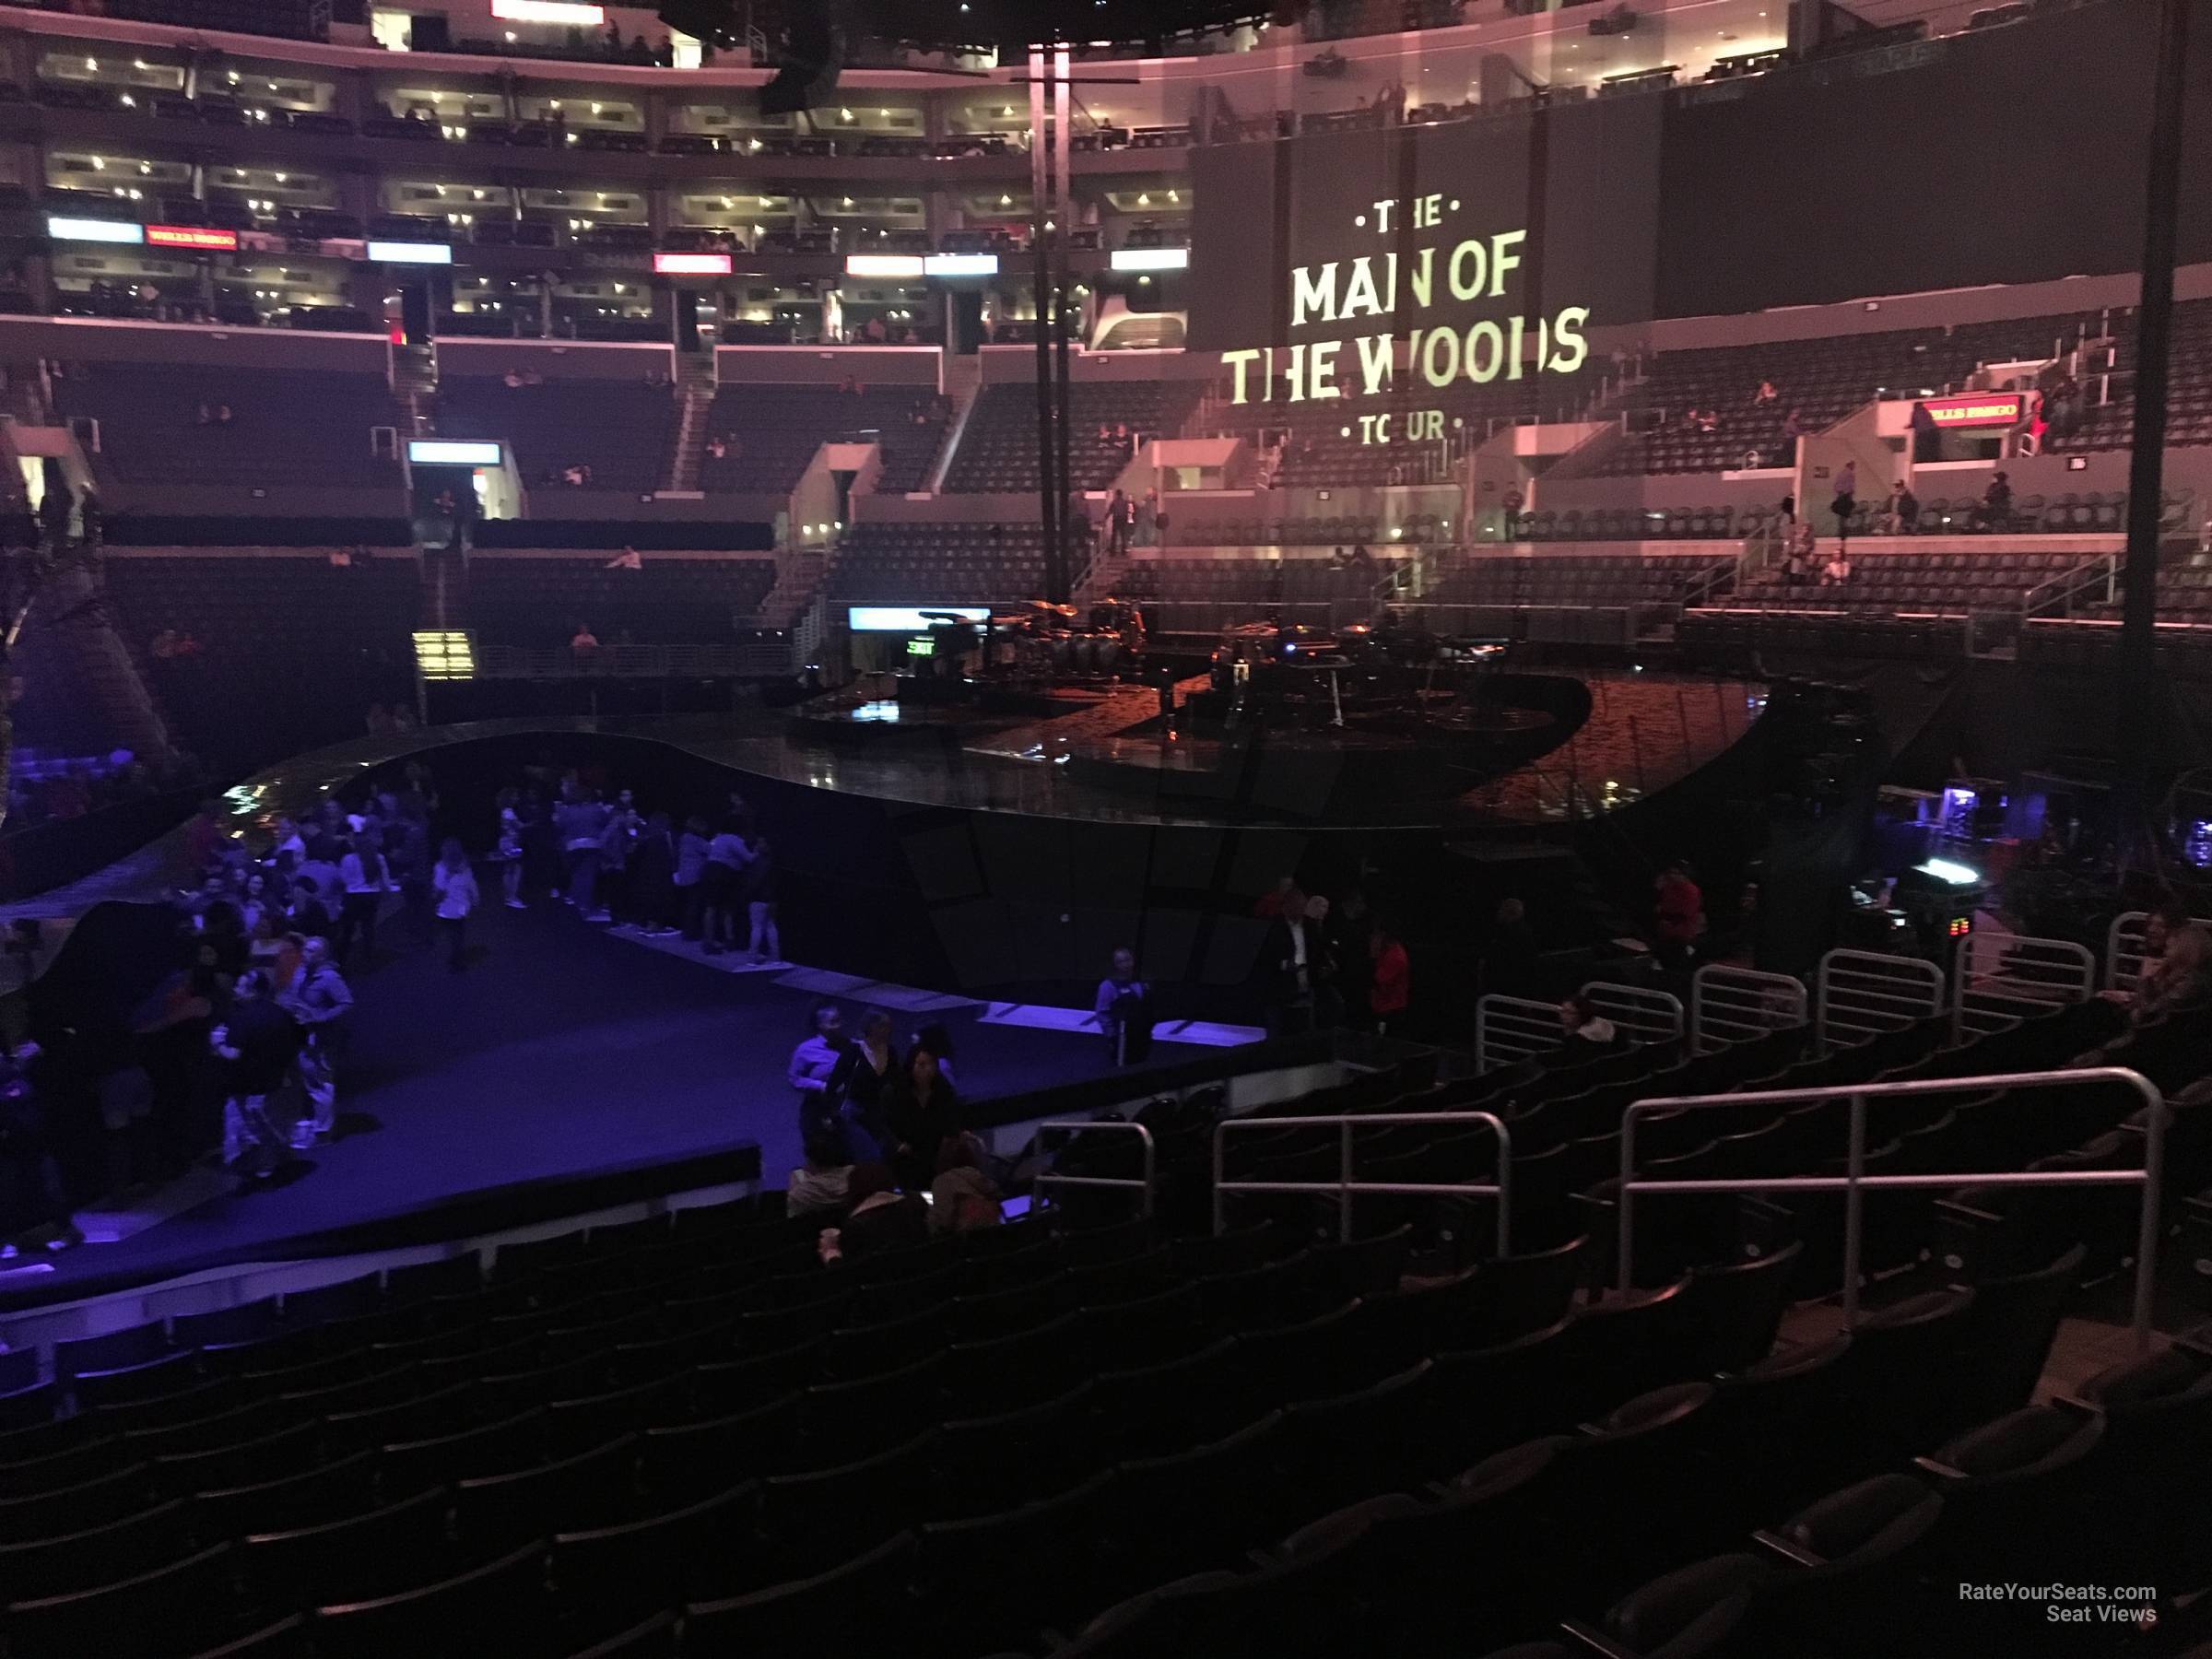 Staples Center Section 119 Concert Seating - RateYourSeats.com2400 x 1800